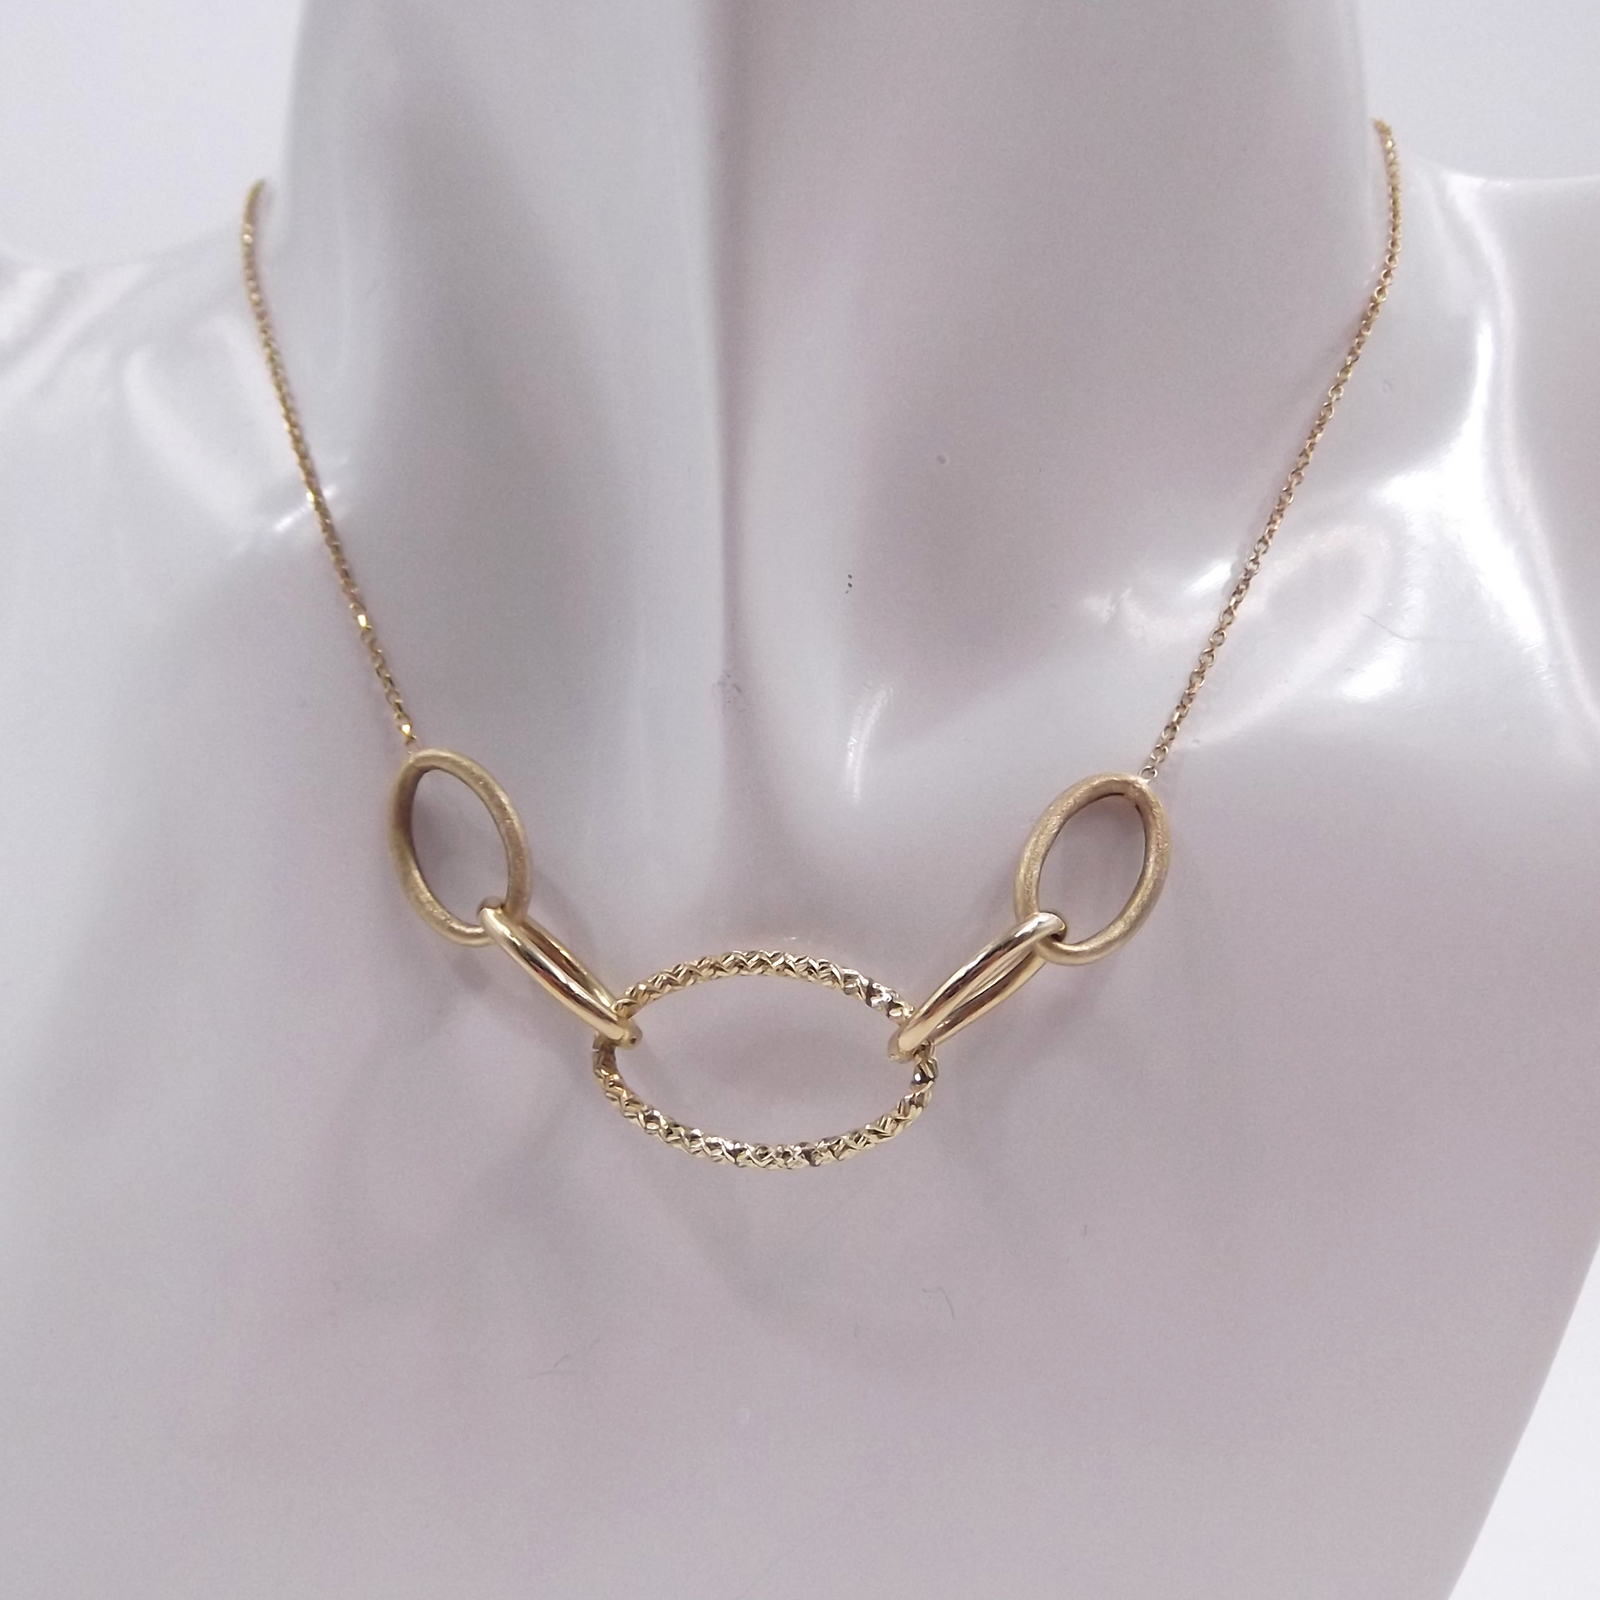 Necklace Yellow Gold 14 Kt. Women's Chain Chain Collier Choker Fantasy ...